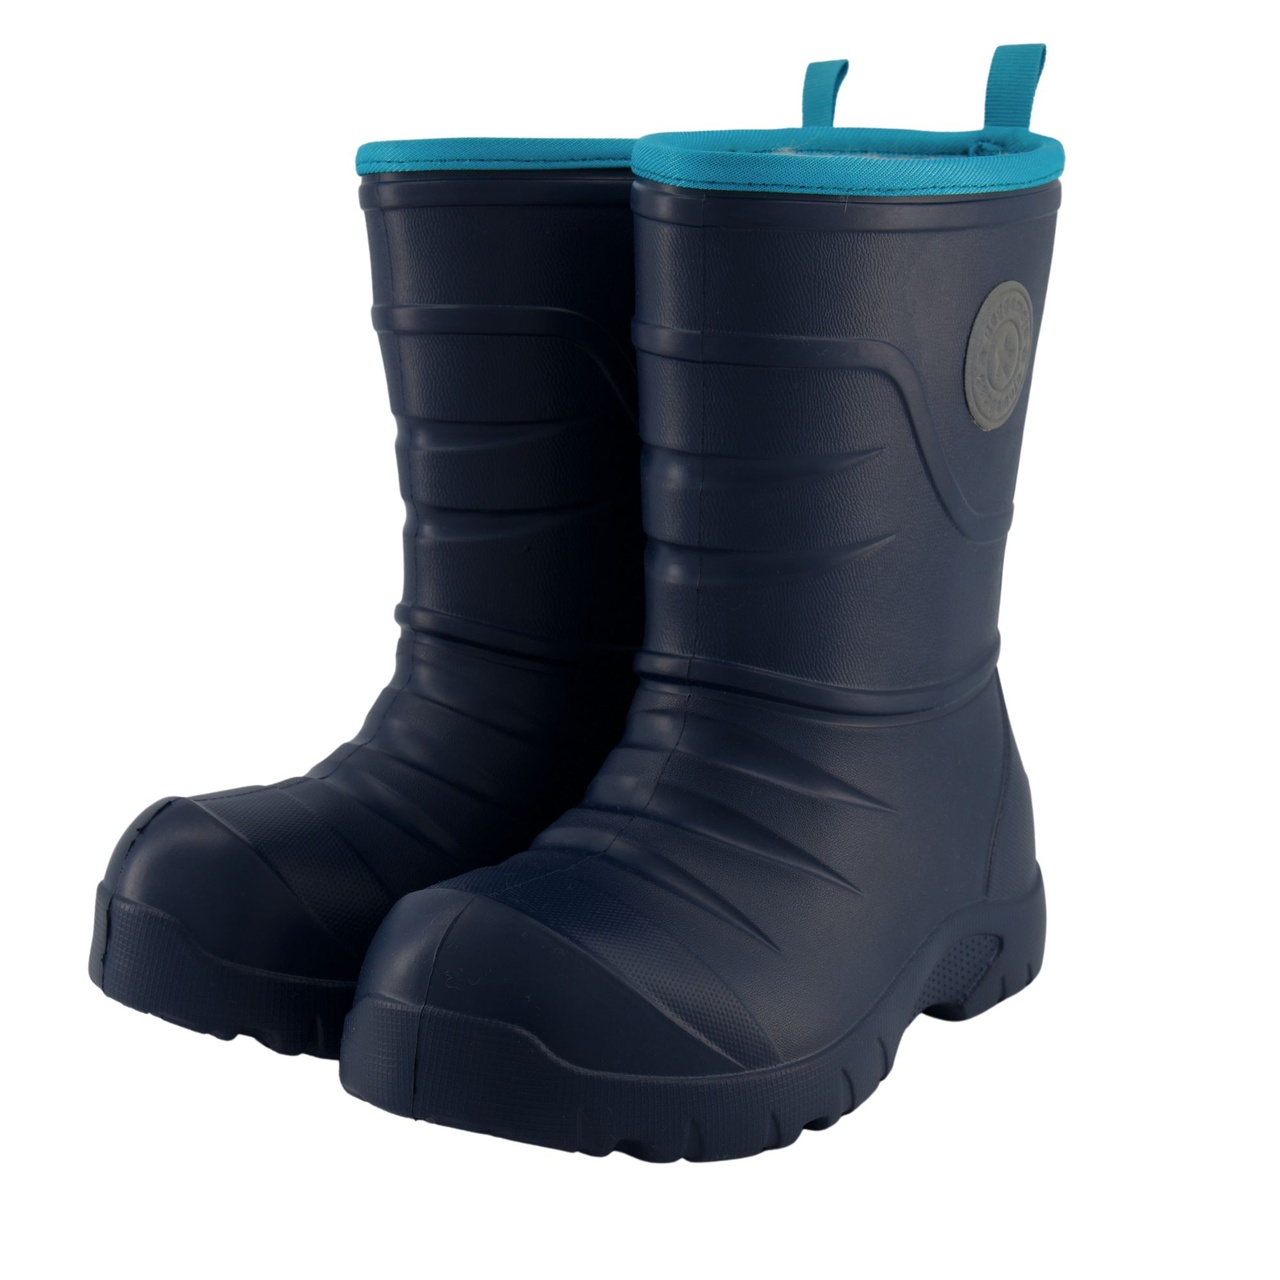 All-weather Boot Navy  33 (20,5 cm)